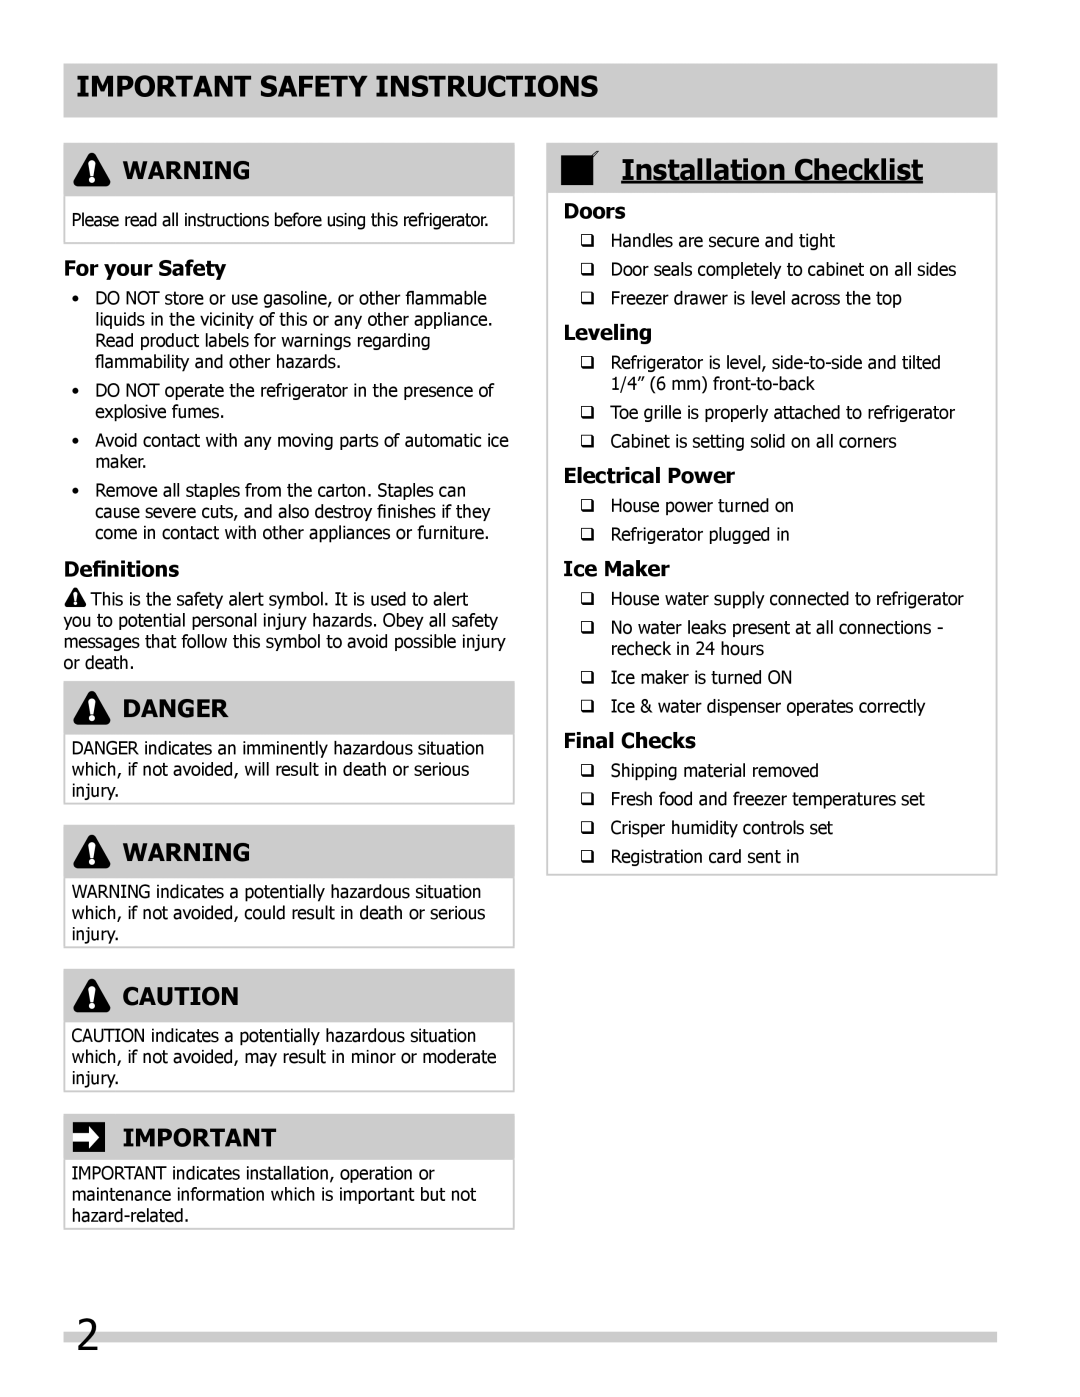 Frigidaire FPHB2899PF Important Safety Instructions, Installation Checklist, Danger, For your Safety, Definitions, Doors 